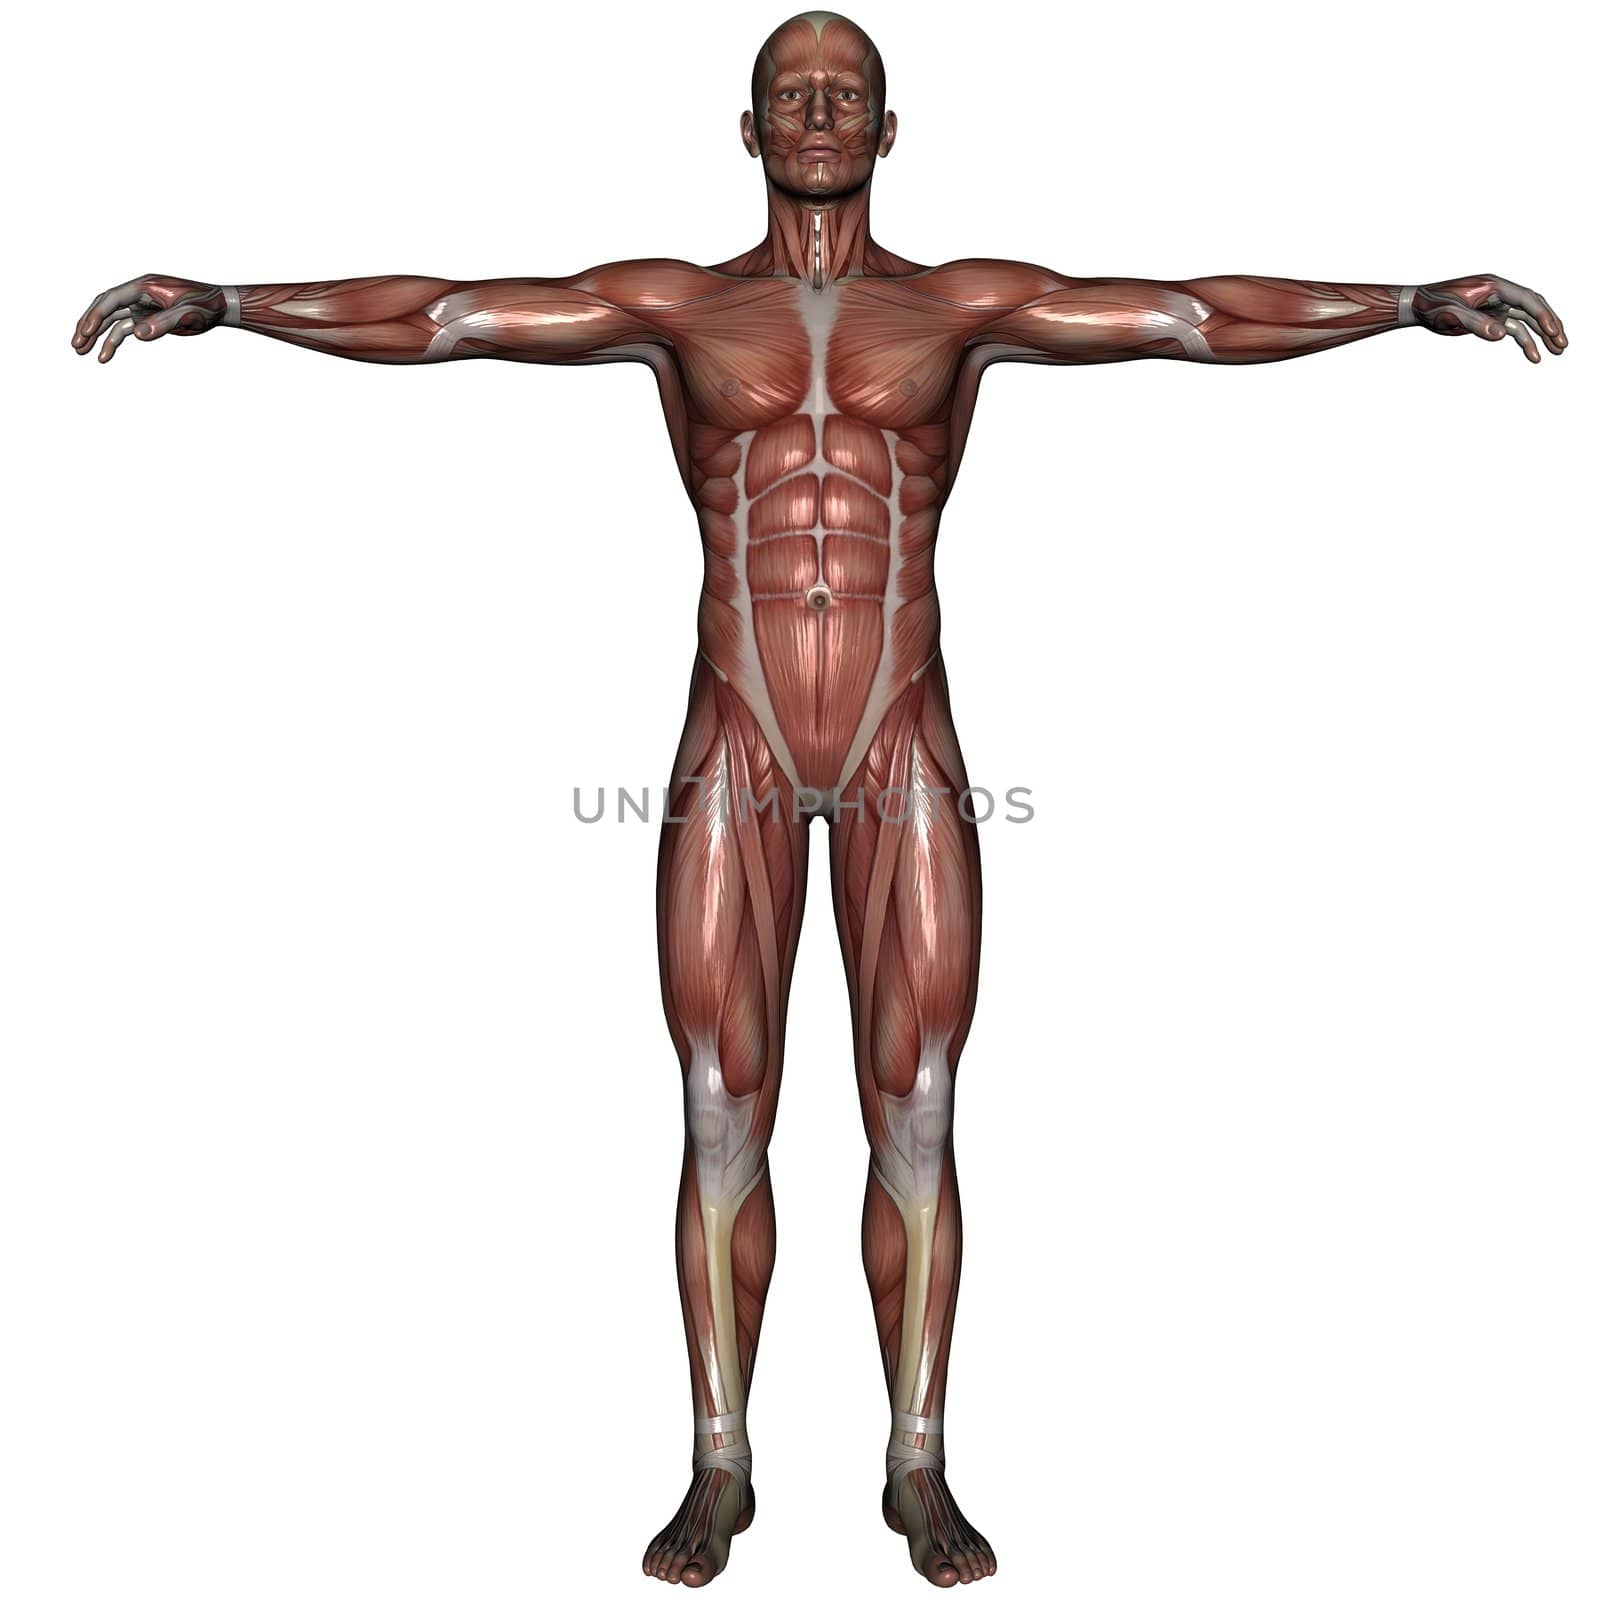 3D rendered muscle of man on white background isolated